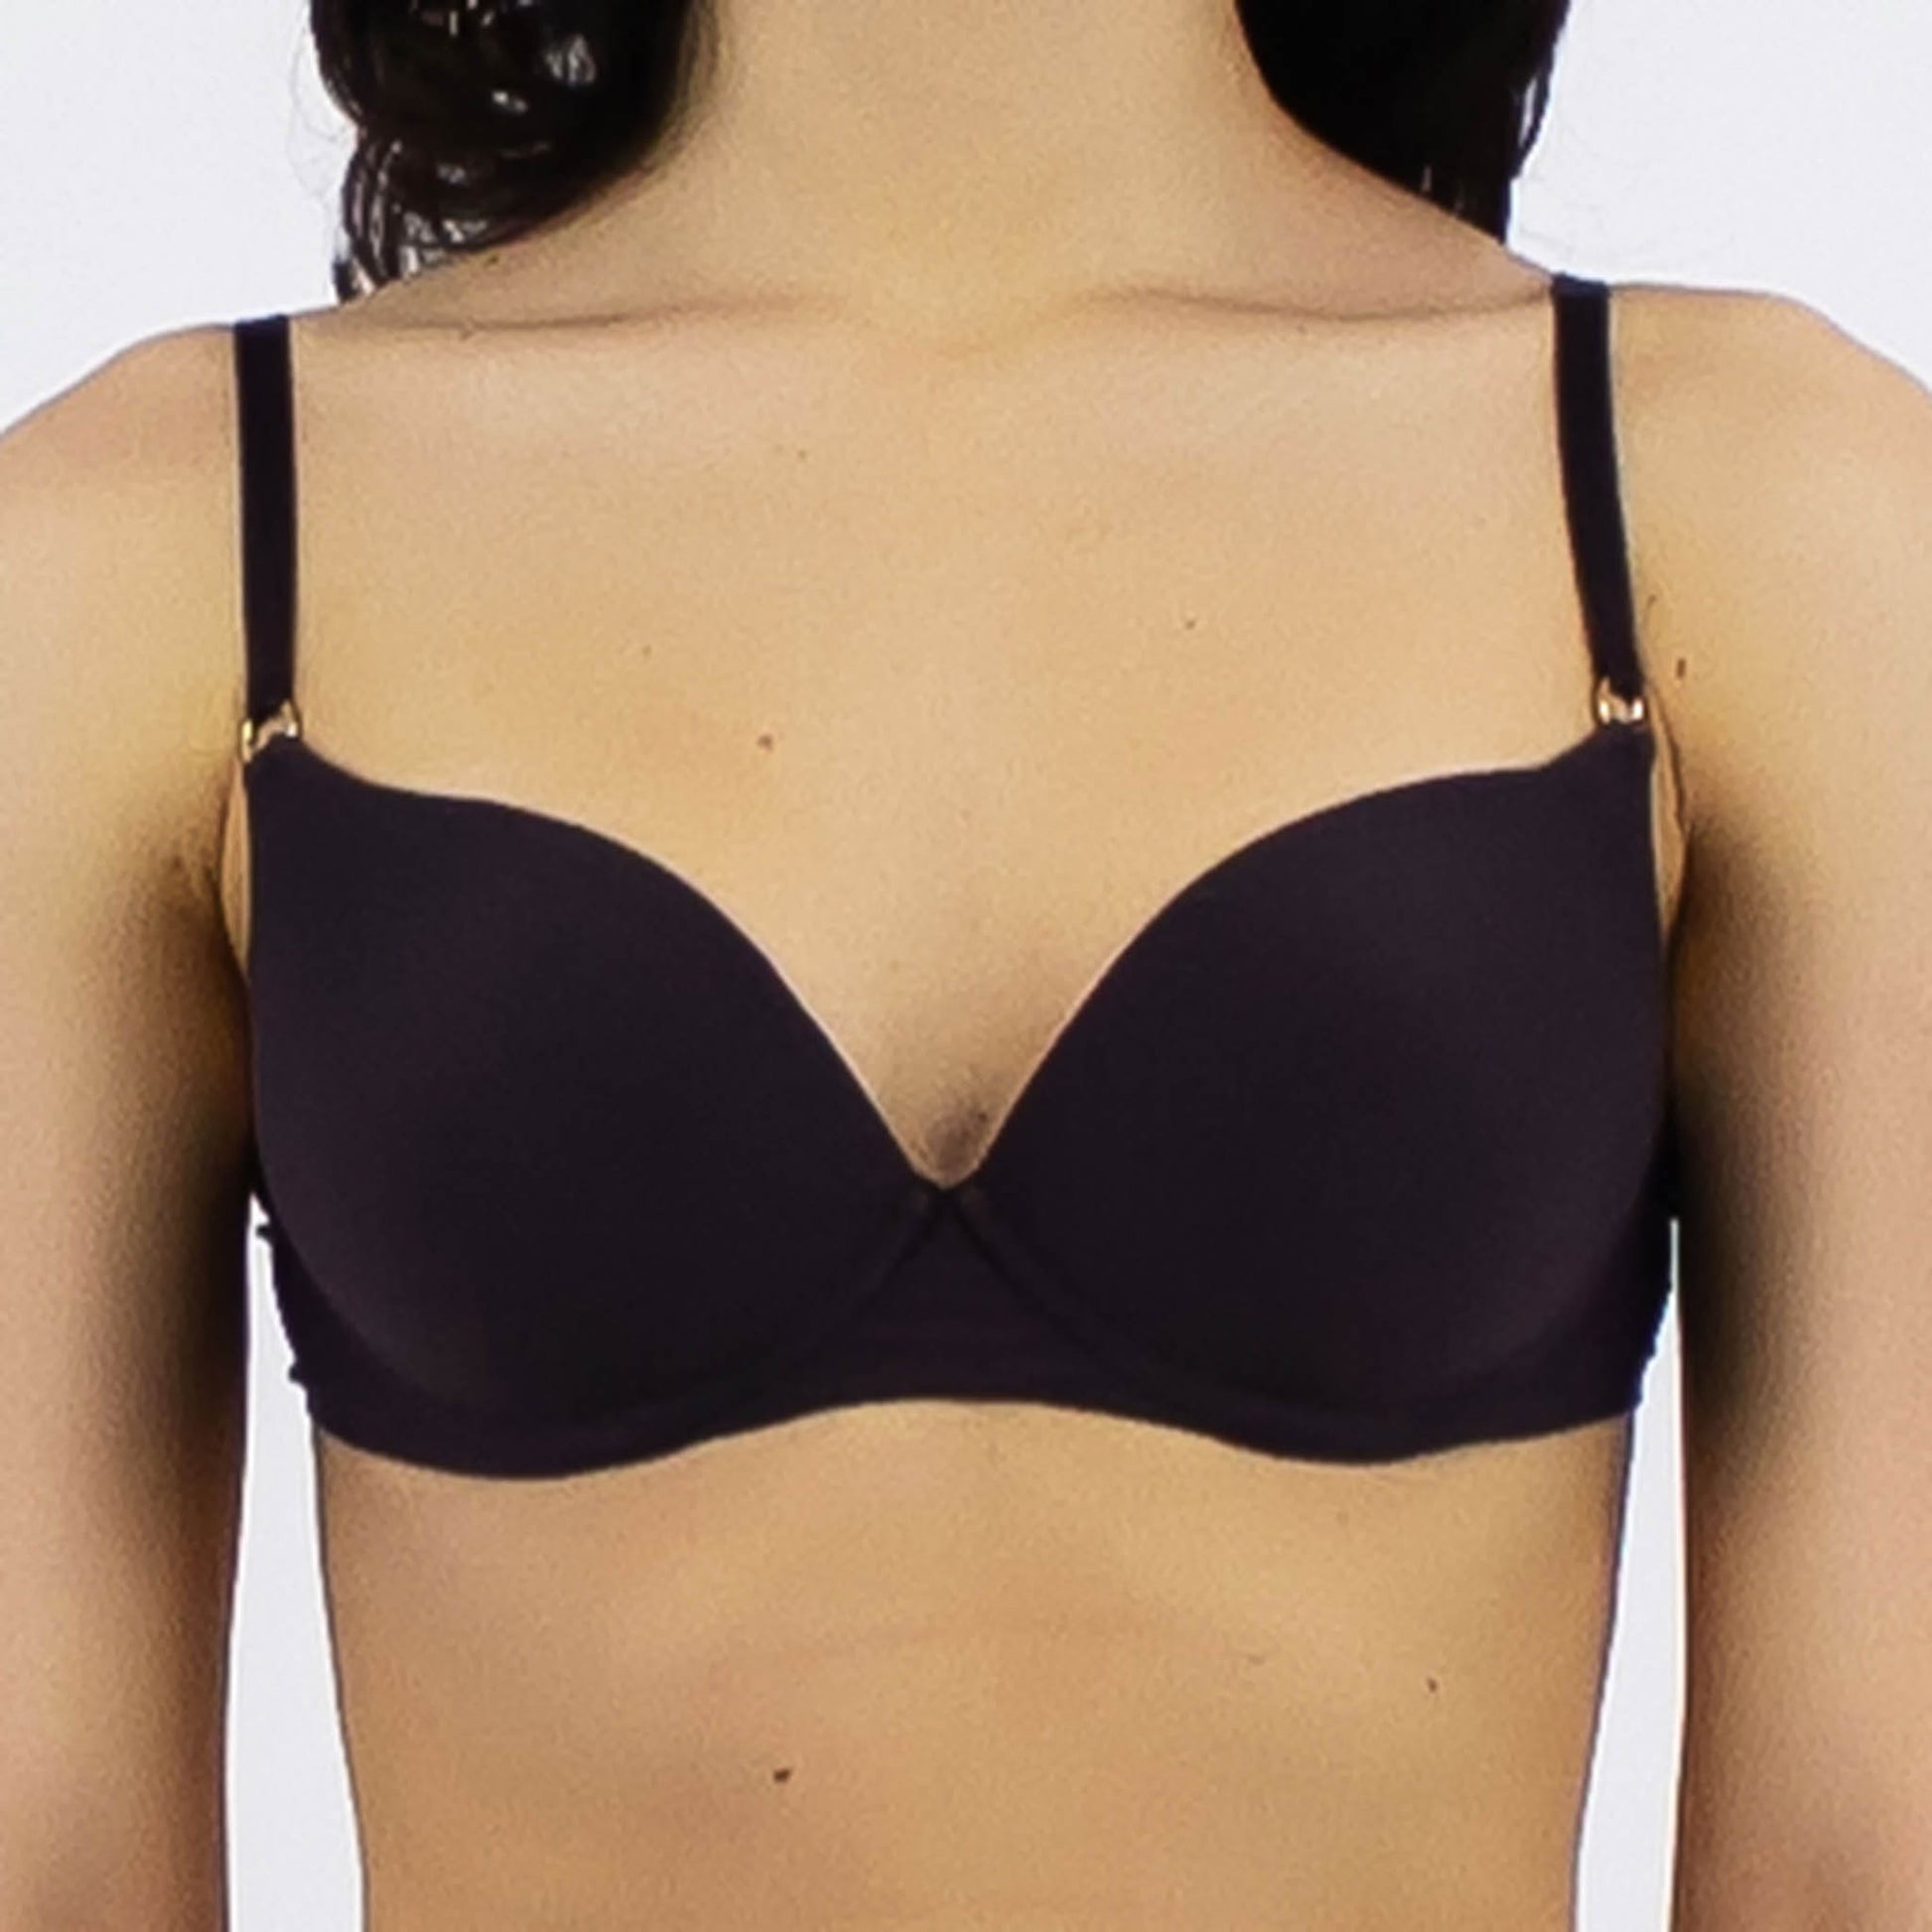 Nokaya basic t-shirt push-up bra, support from underwire. Front close look.